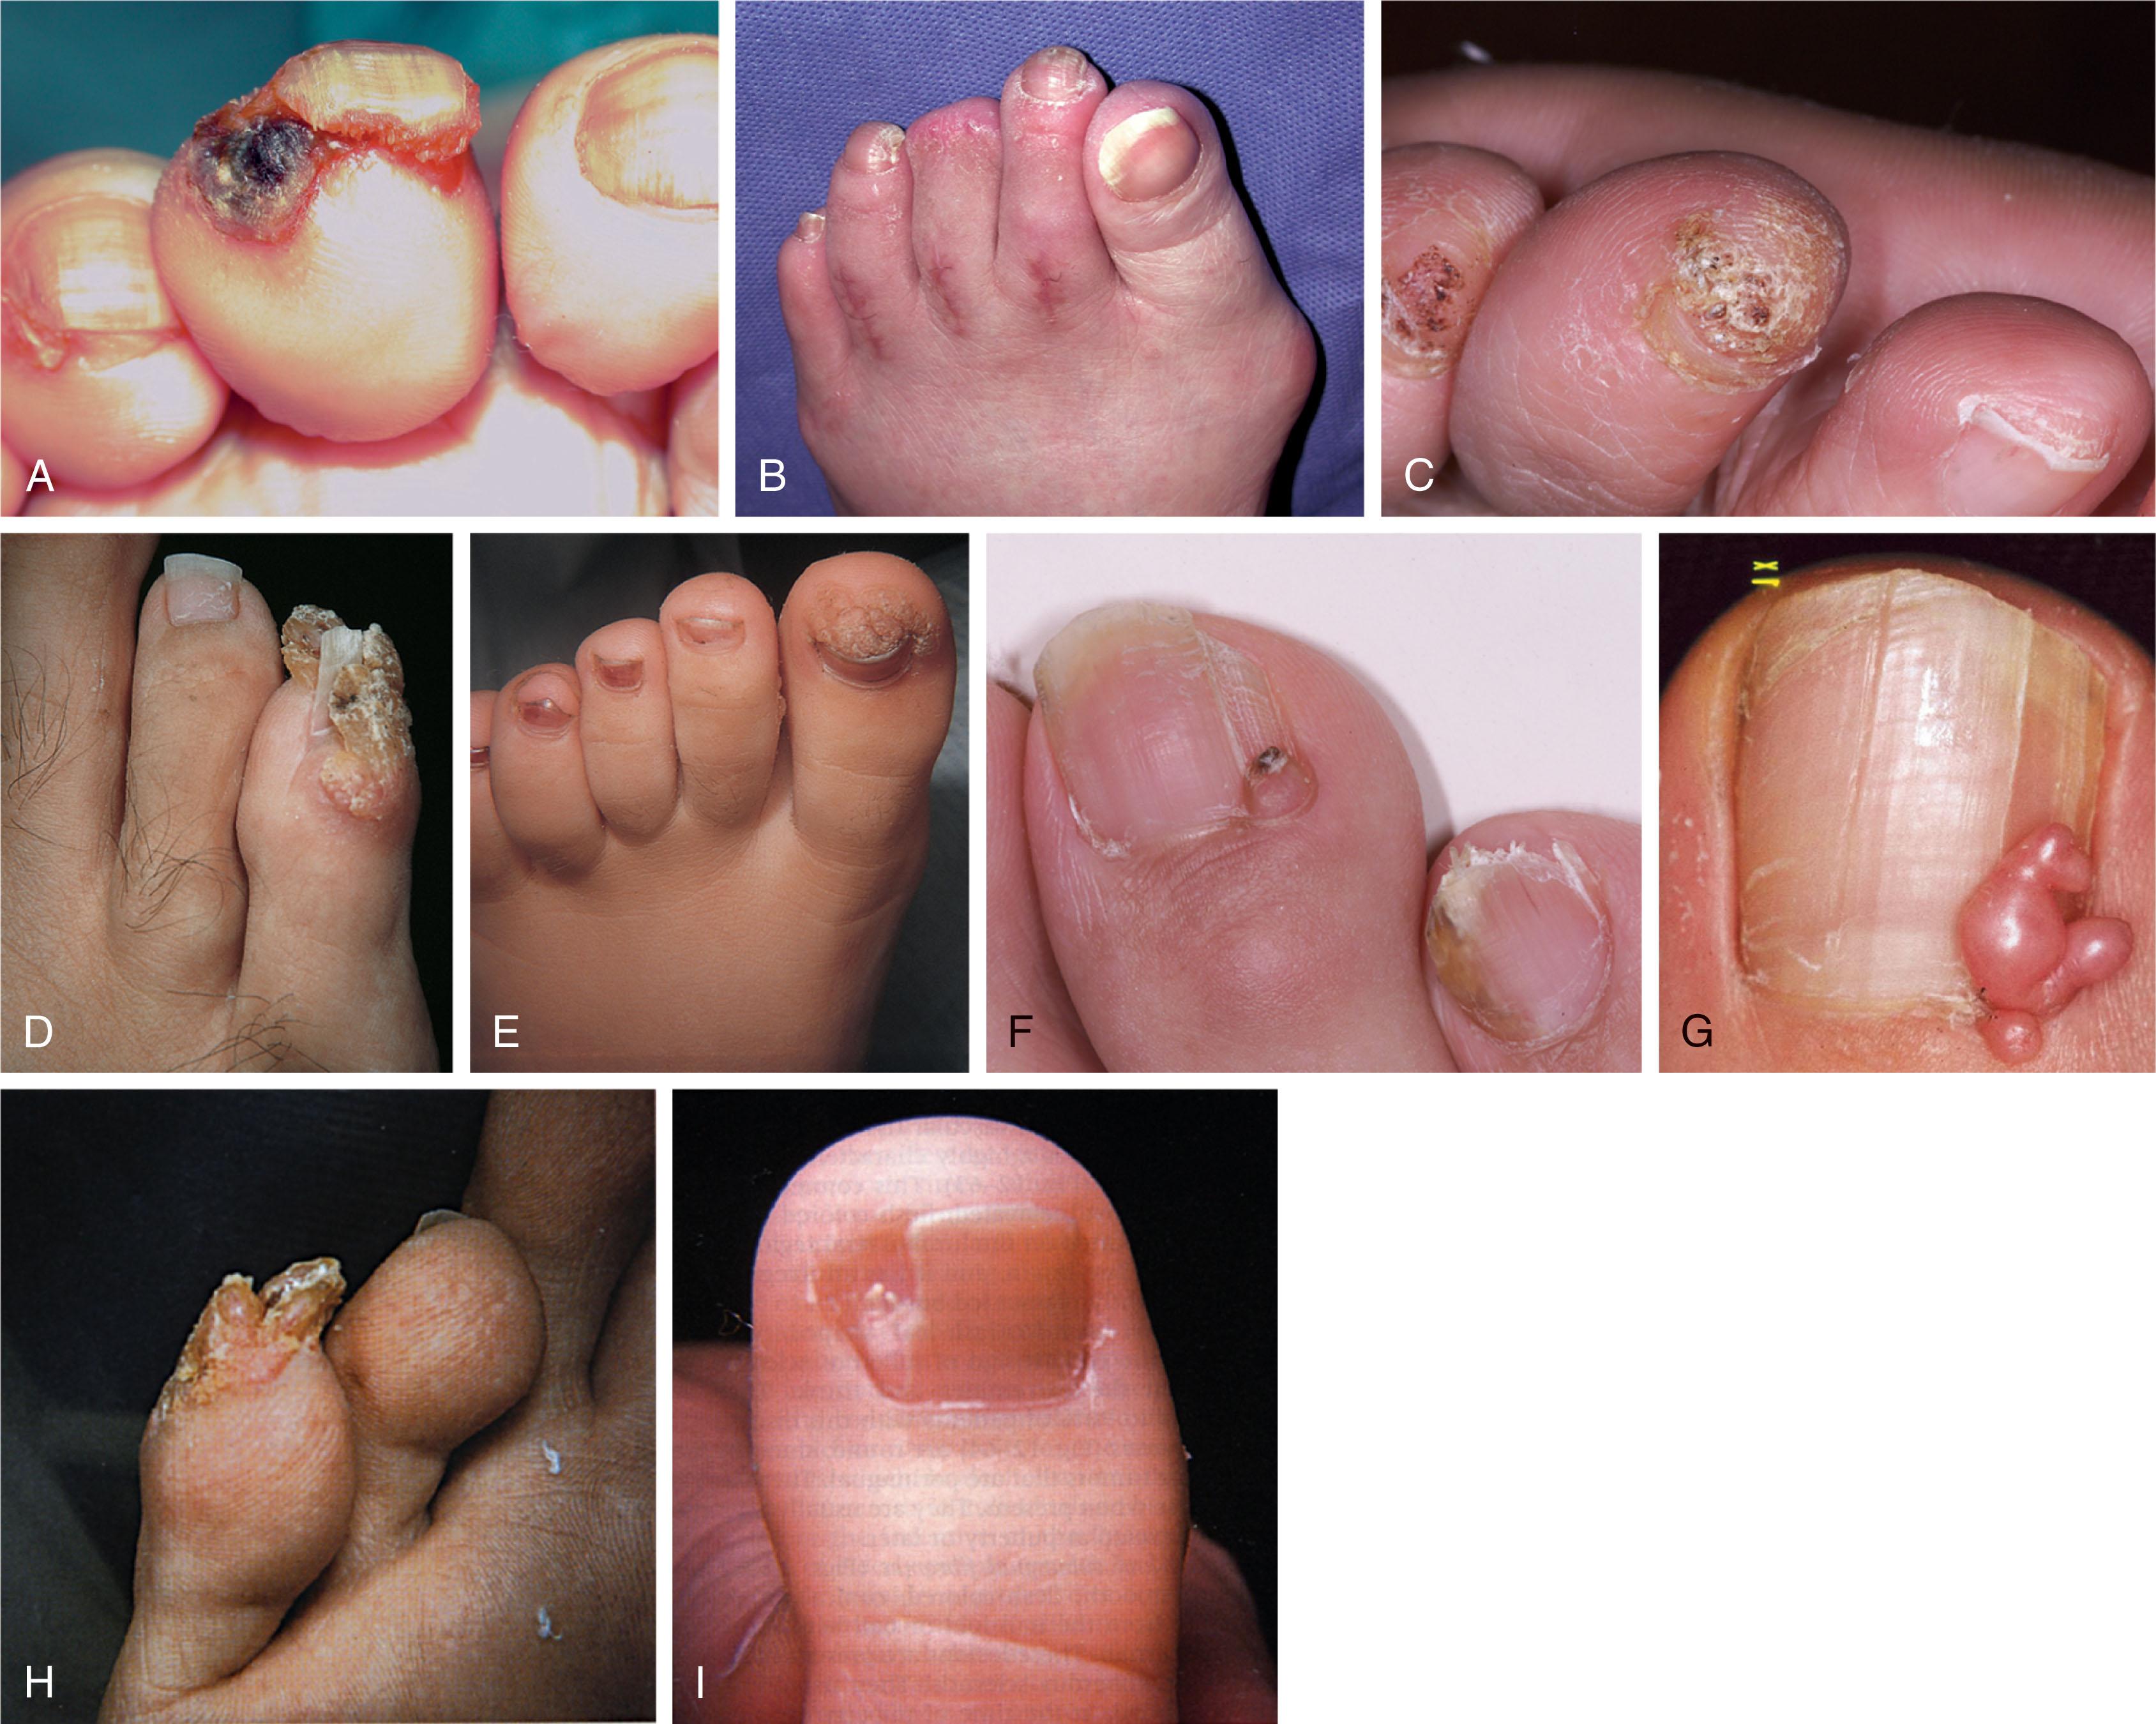 Fig. 14-13, A , Subungual wart (verruca) on the third toe was refractory to topical treatments. B , Treatment of verruca on the third toe was by amputation at the distal interphalangeal joint. C , Verrucae on multiple toes. D , Filiform wart with finger-like projections around the fifth toenail. E , Subungual wart causes distortion of the hallux nailplate. F , Angiofibroma. This may be the first evidence of tuberous sclerosis or ectodermal dysplasia. G , Periungual fibroma producing a longitudinal deformity in the nail plate. H , Tuberous sclerosis. Periungual fibromas are present on the tip of the fifth toe in a patient with tuberous sclerosis. I , Subungual fibroma on the lateral edge of the nail plate in a patient with tuberous sclerosis.